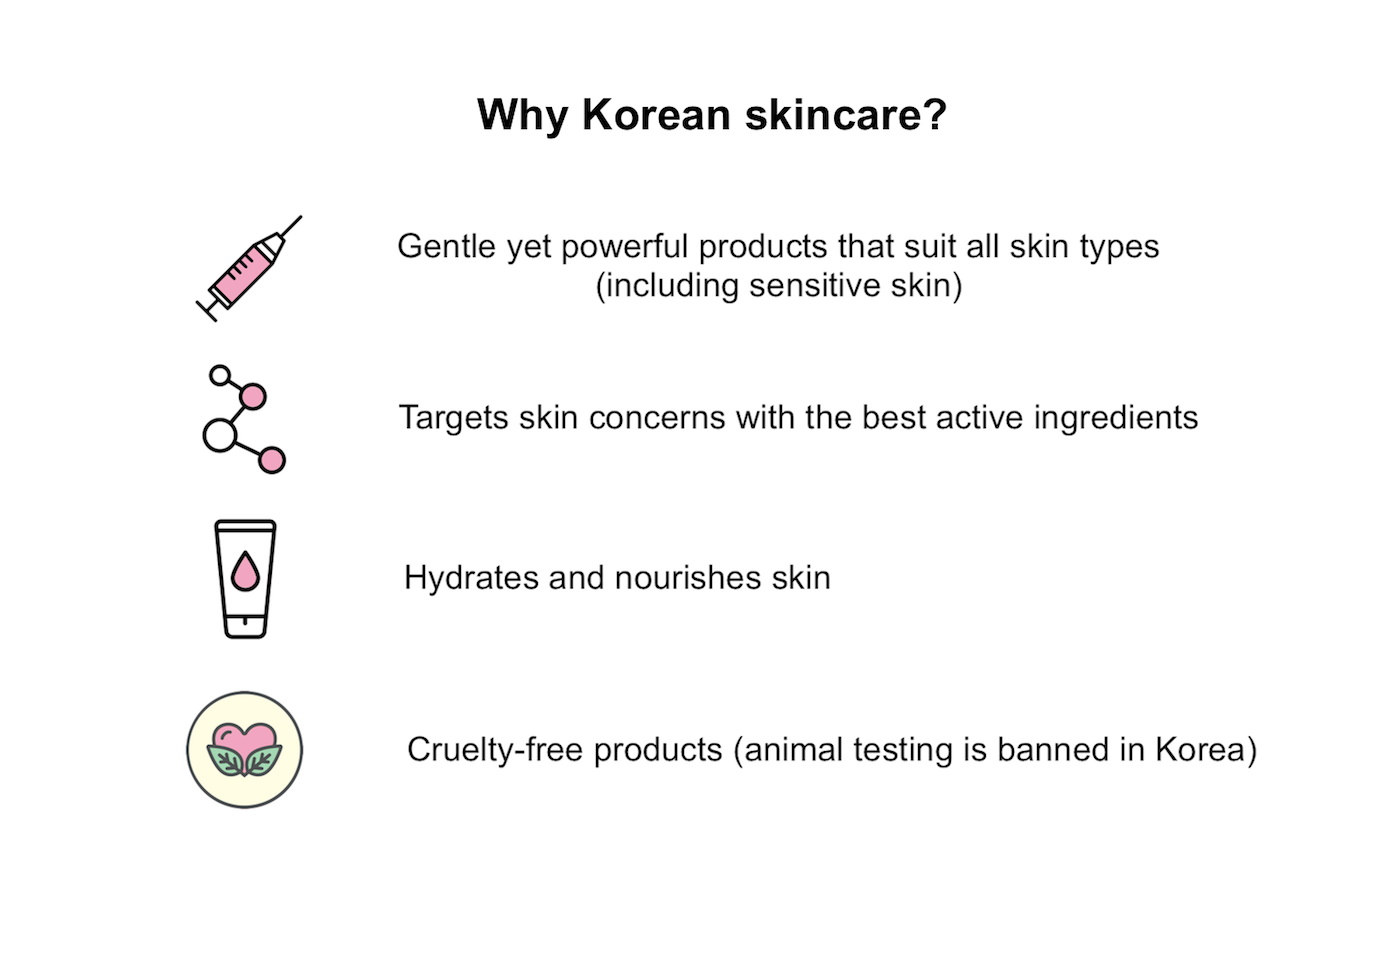 Why use Korean skincare? Gentle yet powerful products that suit all skin types (including sensitive skin). Targets skin concerns with the best active ingredients. Hydrates and nourishes skin. Cruelty-free products (animal testing is banned in Korea). 